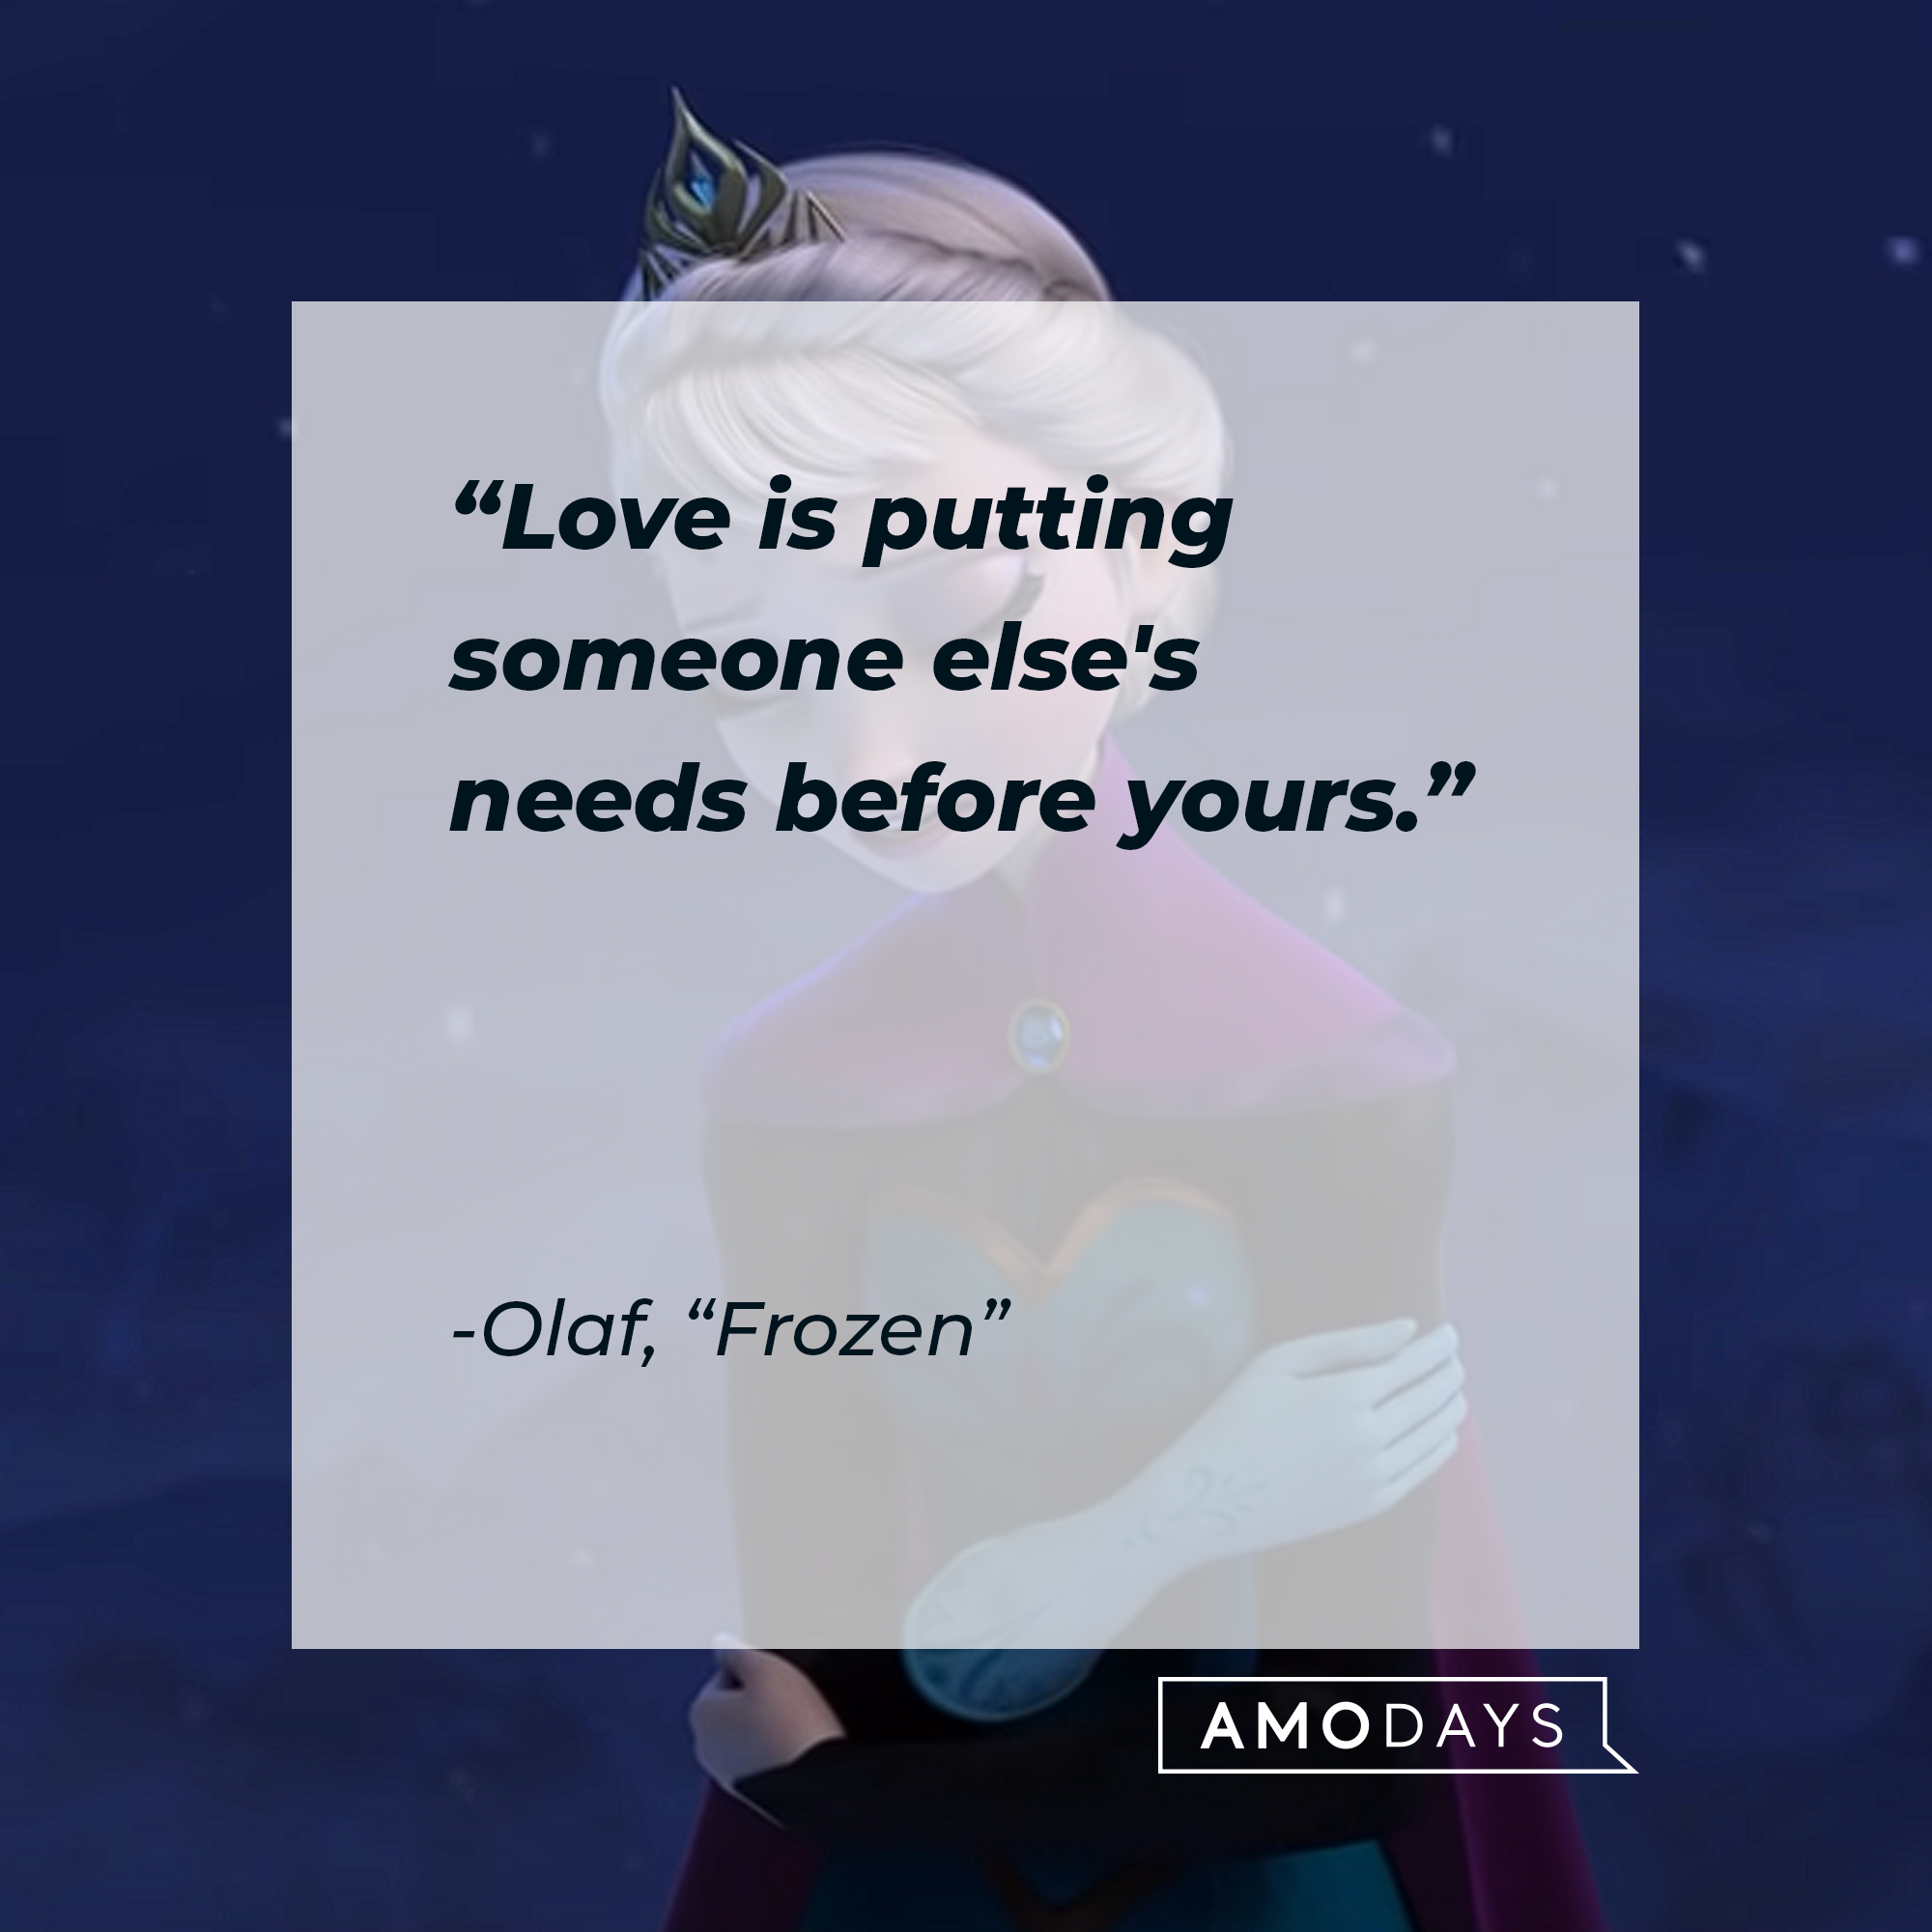 Olaf's "Frozen" quote: "Love is putting someone else's needs before yours." | Source: Youtube.com/DisneyUK